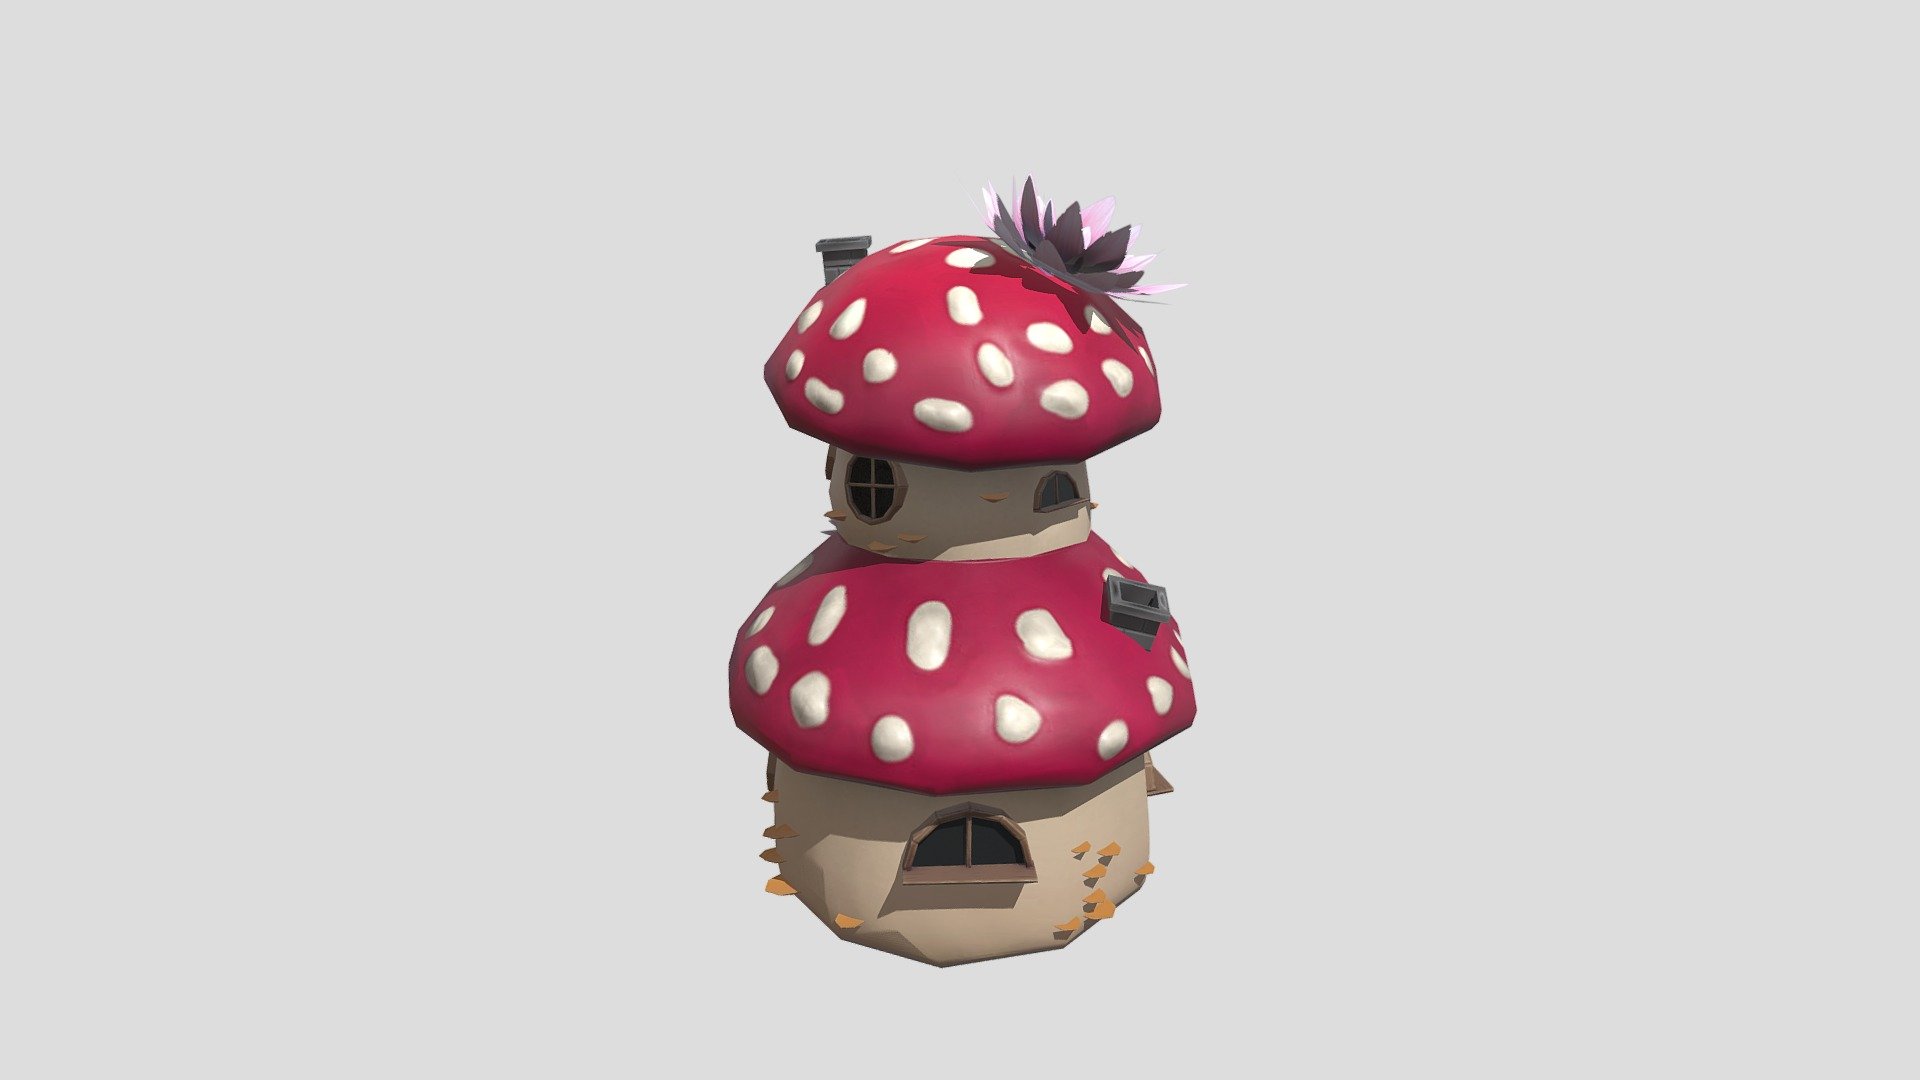 Mushroom house for envoroment art assignment. Modeled in maya, detailed in zbrush and textured in substance painter 3d model